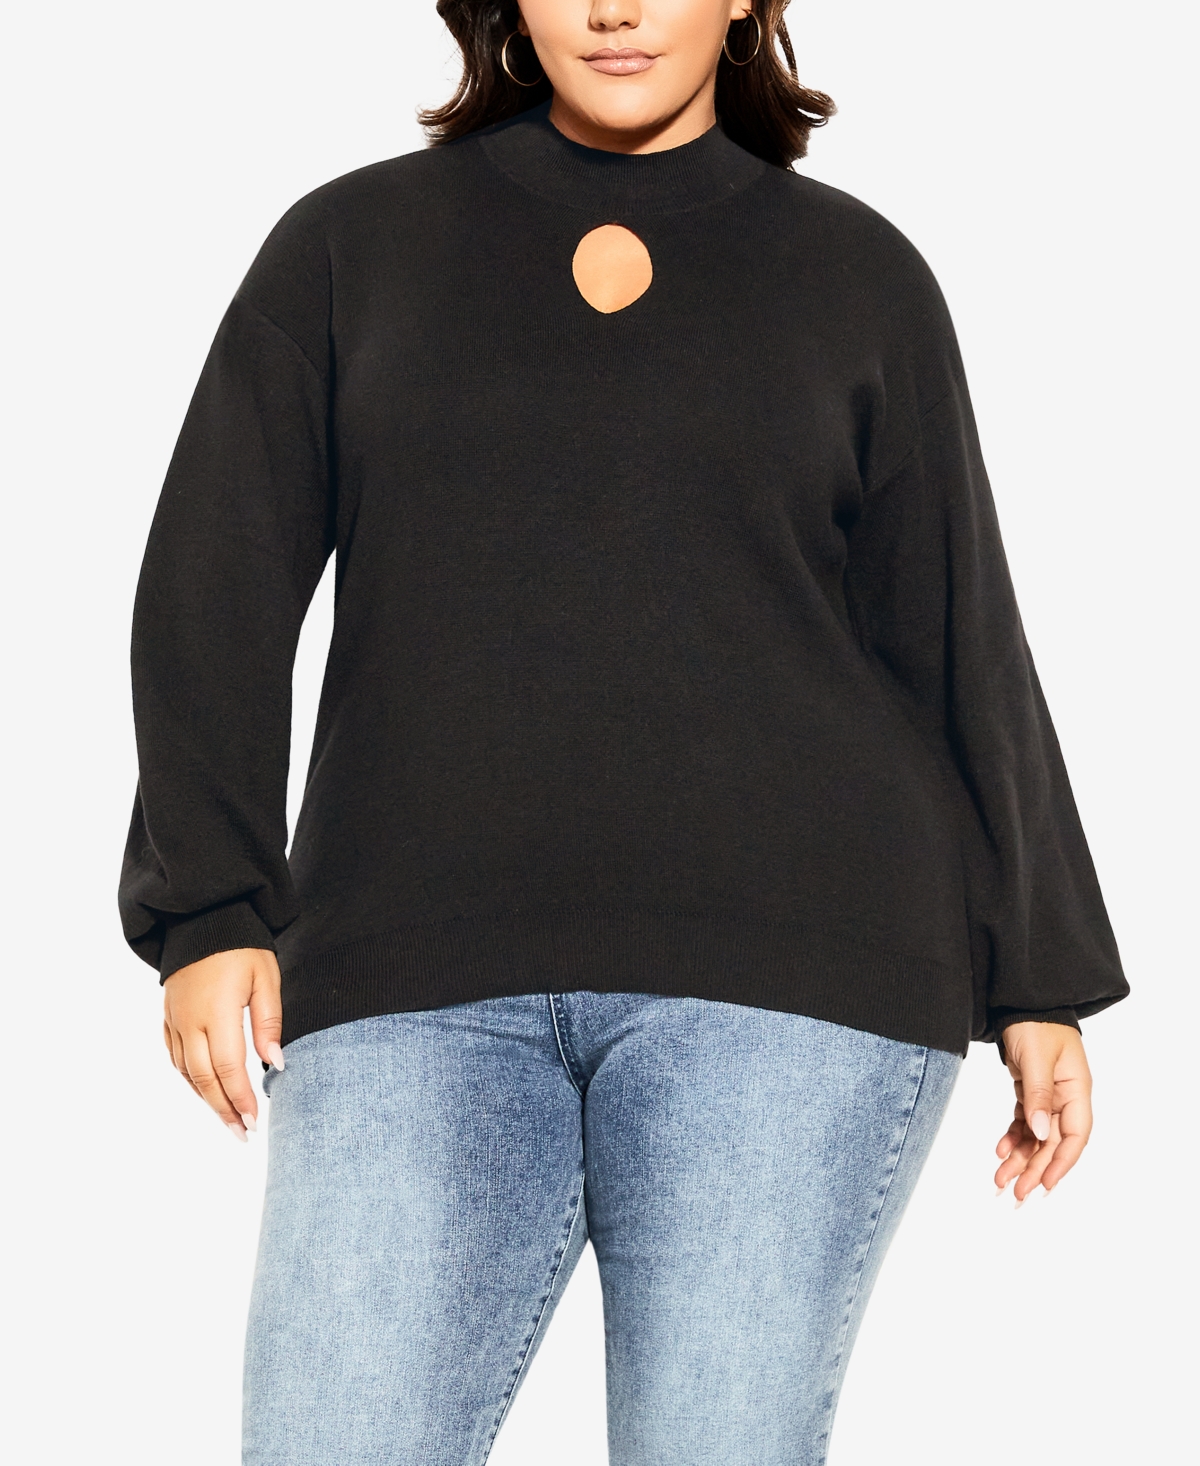 Plus Size Evelyn Sweater - Black